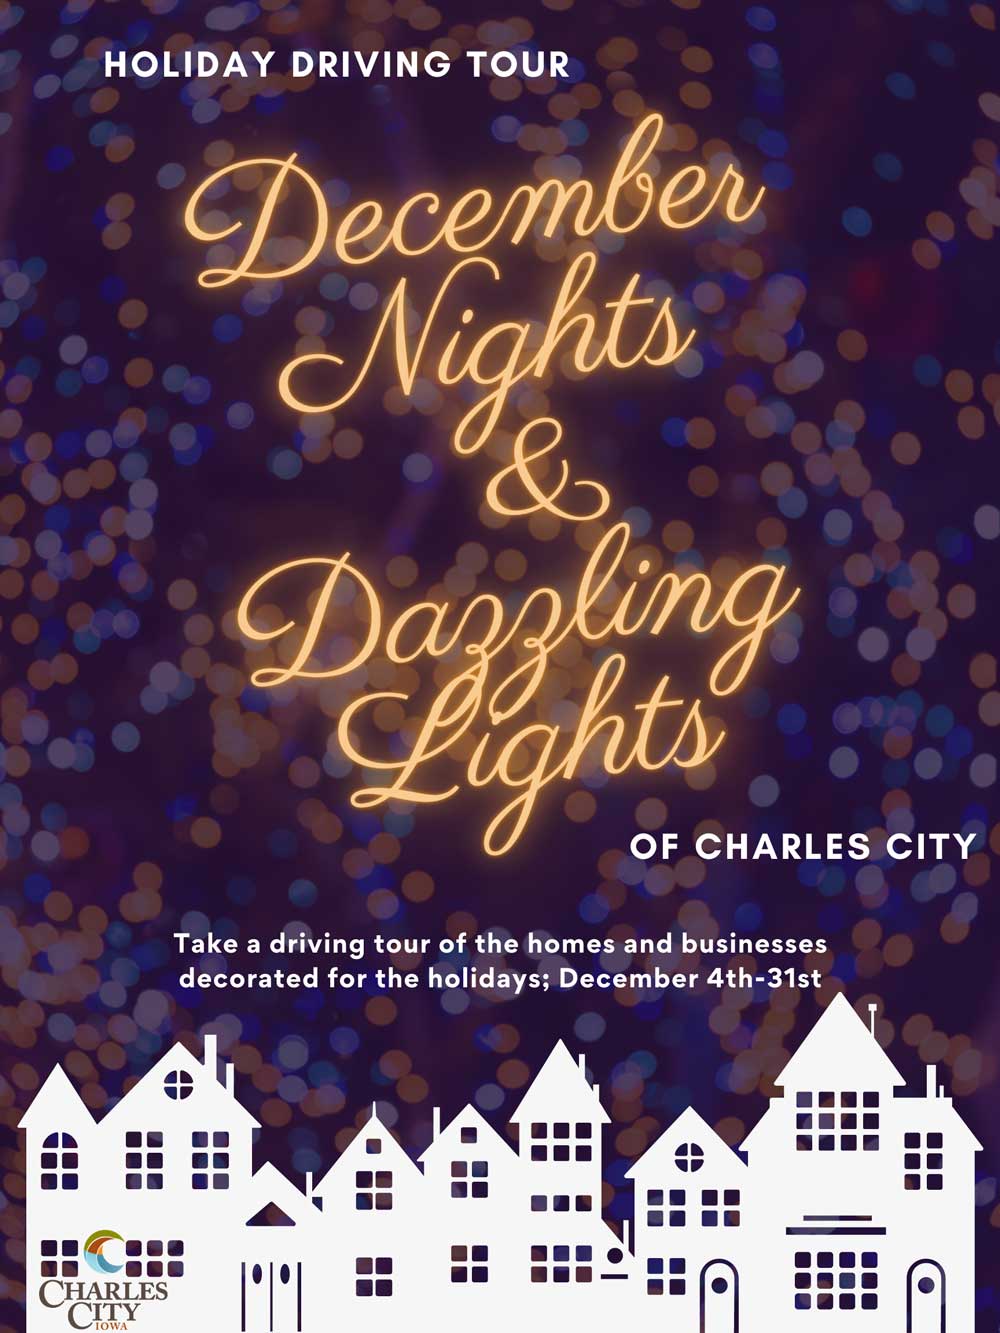 Charles City Chamber organizing holiday lights driving tour